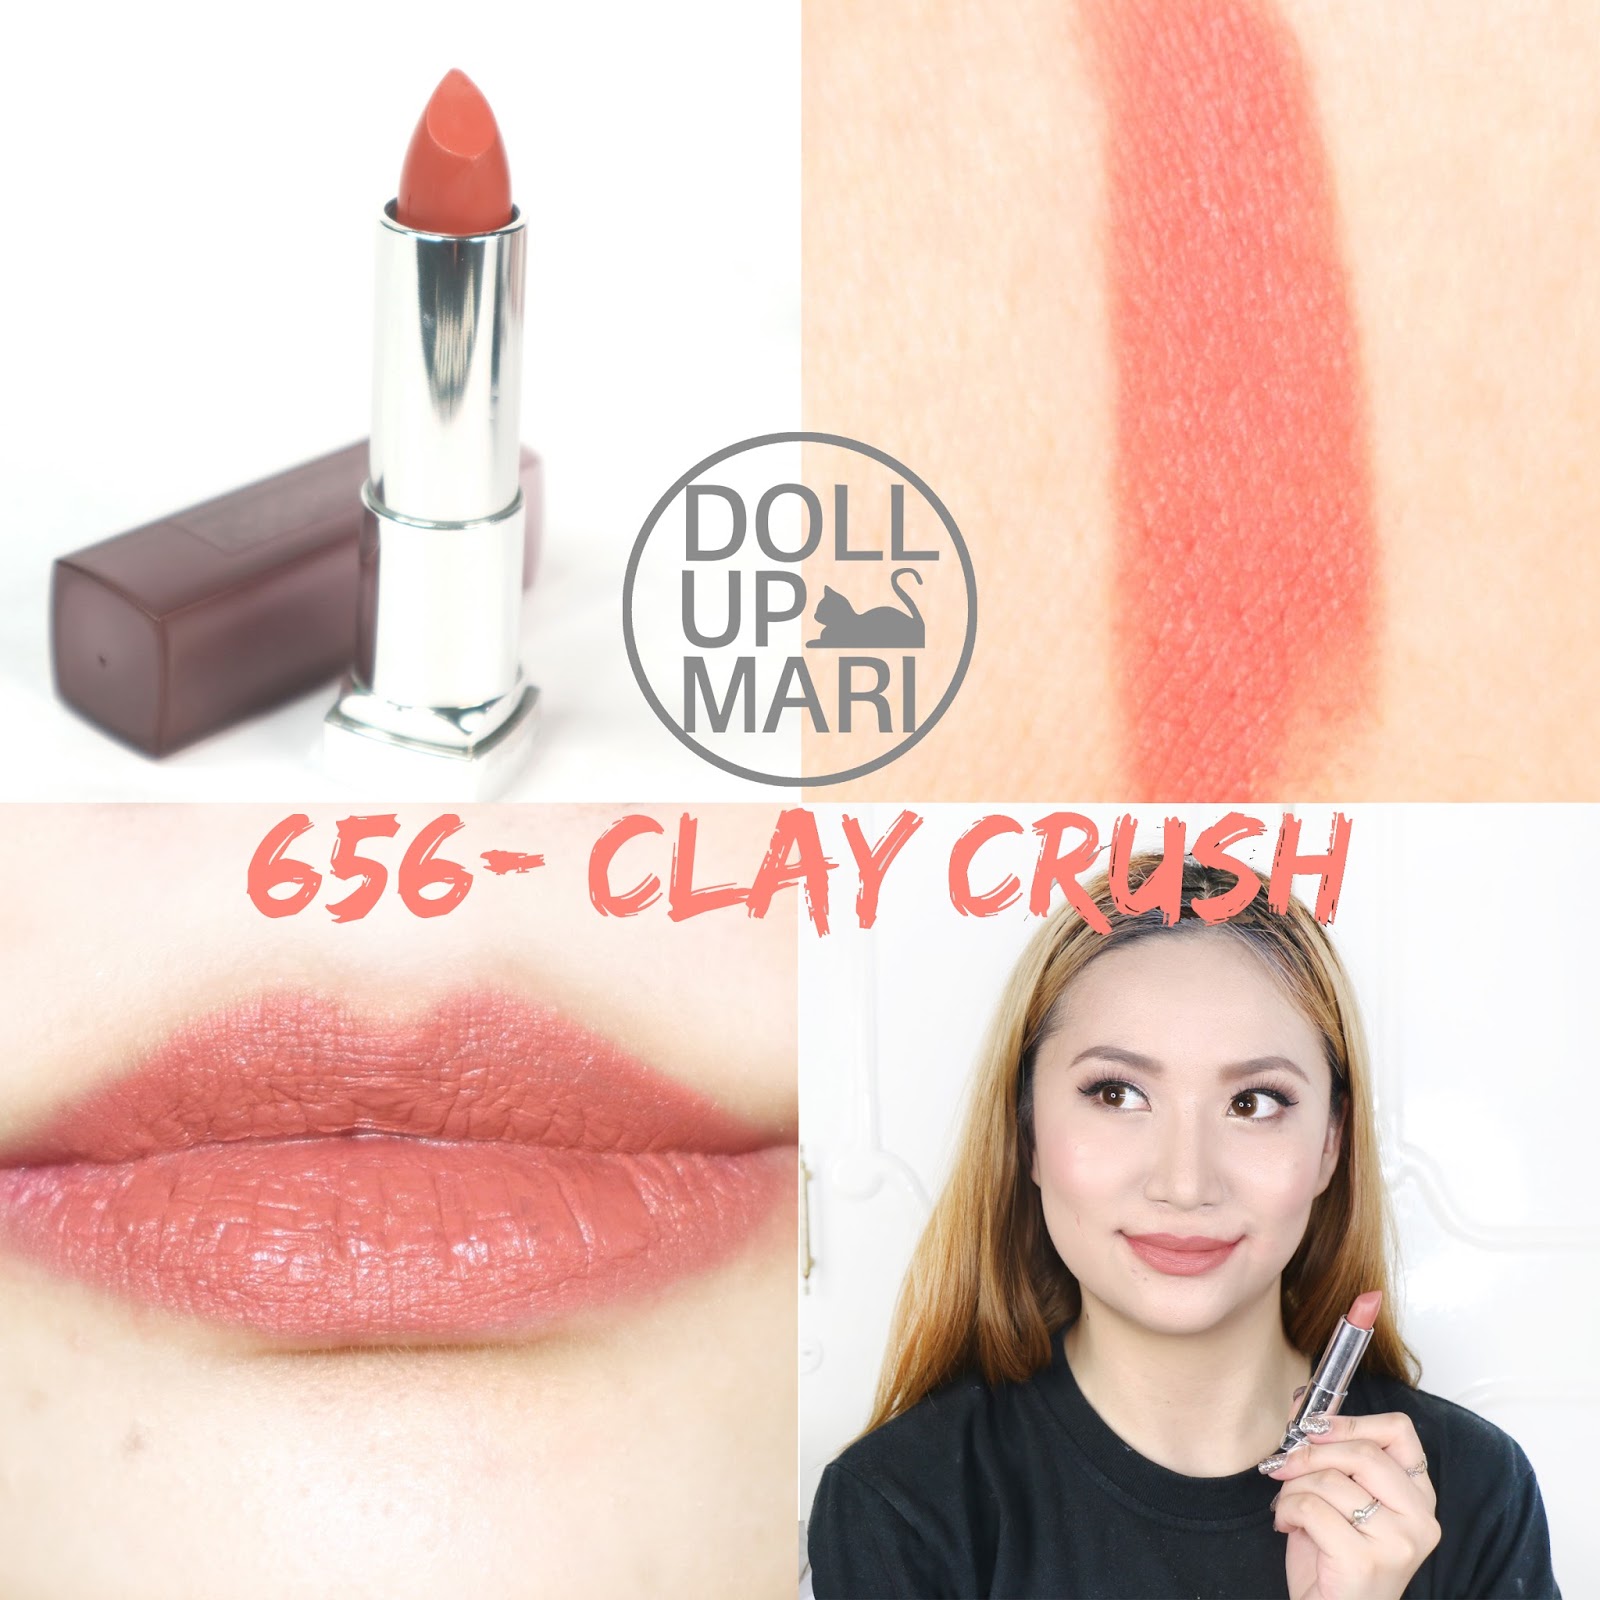 Maybelline Creamy Mattes Brown Nudes Roundup Review and 